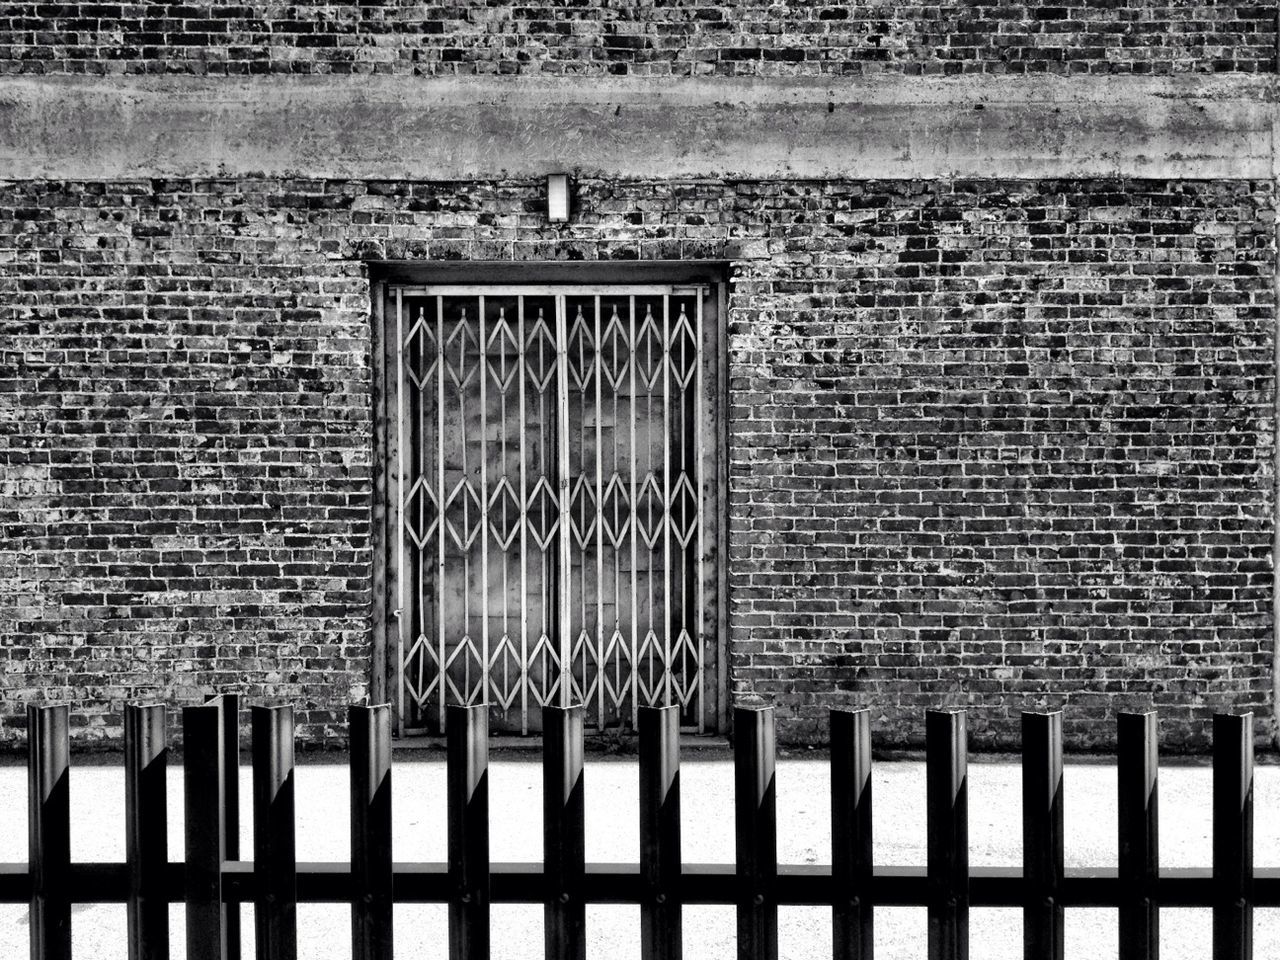 built structure, building exterior, architecture, window, brick wall, protection, full frame, pattern, closed, safety, wall - building feature, backgrounds, security, fence, outdoors, day, house, no people, wall, metal